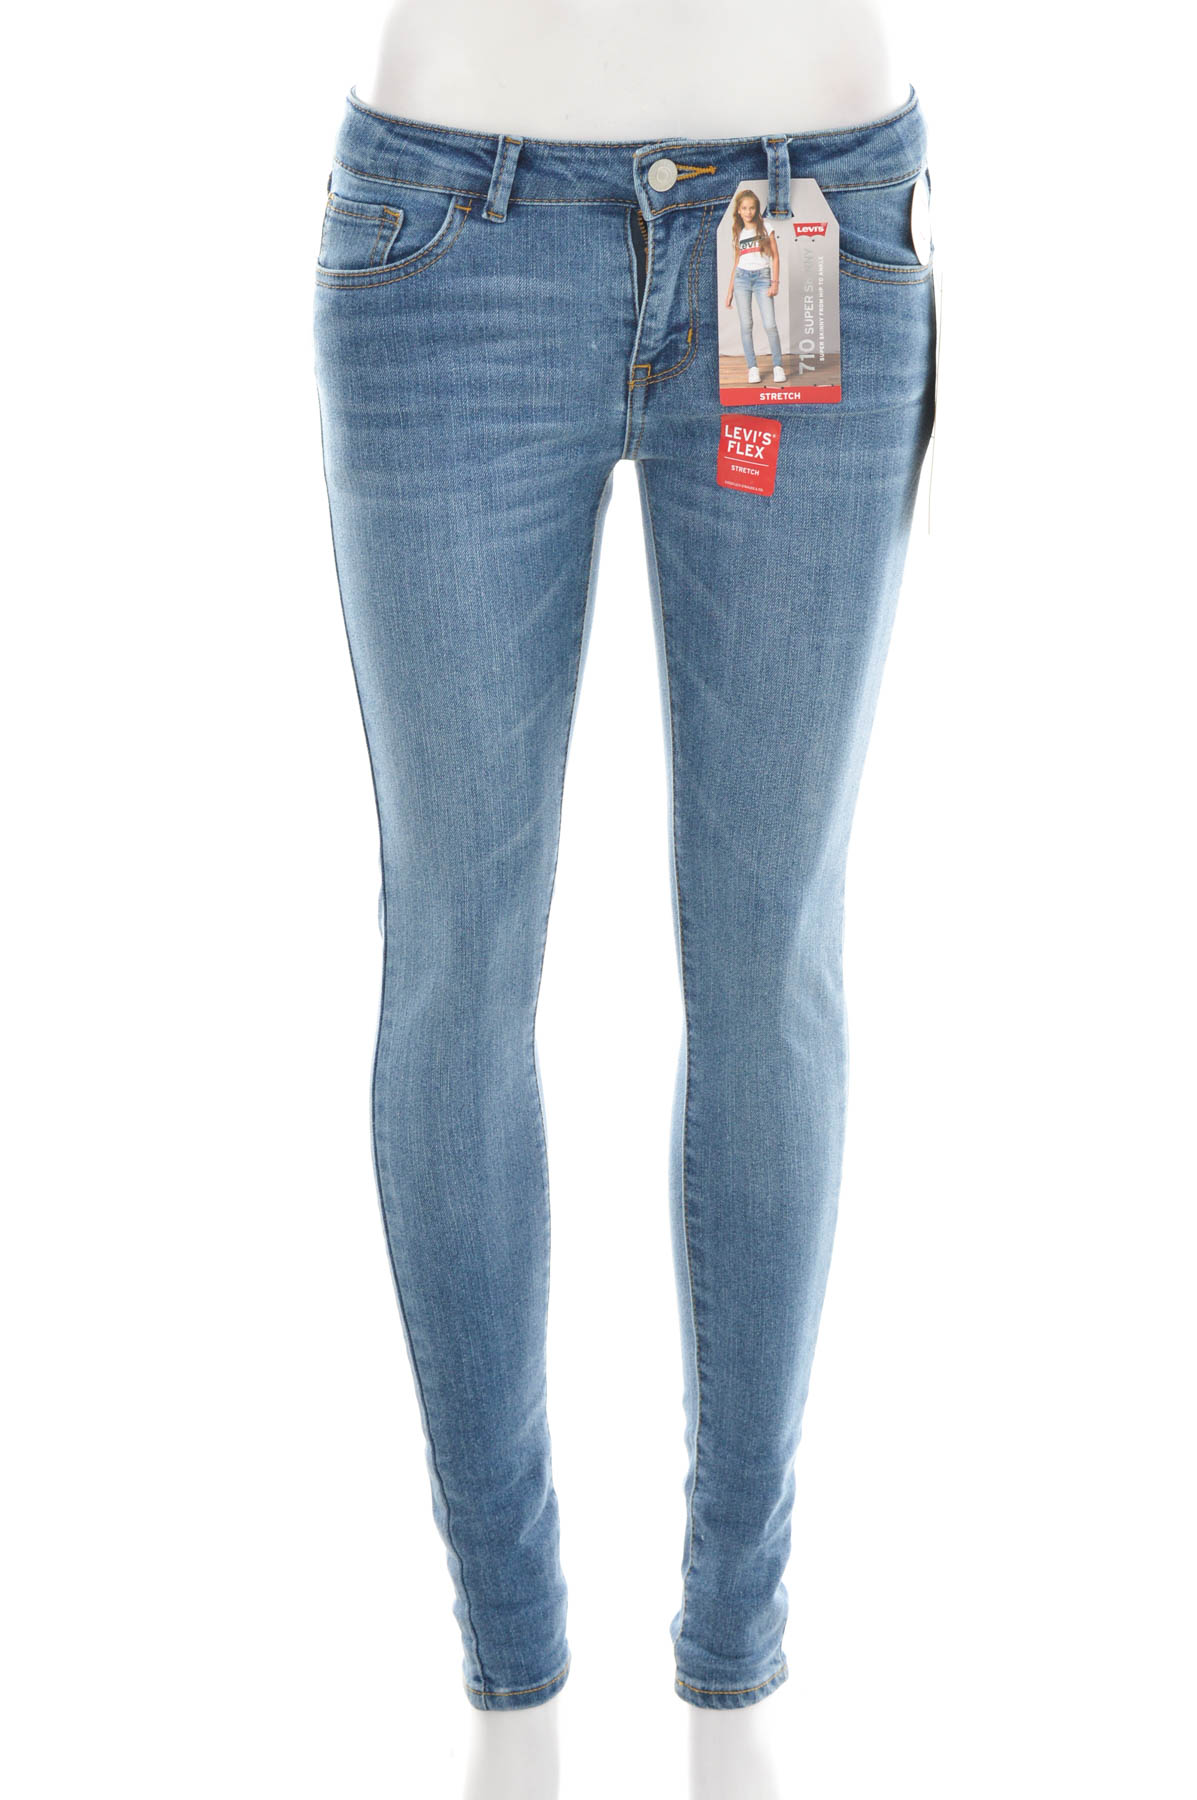 Girl's jeans - LEVI'S - 0